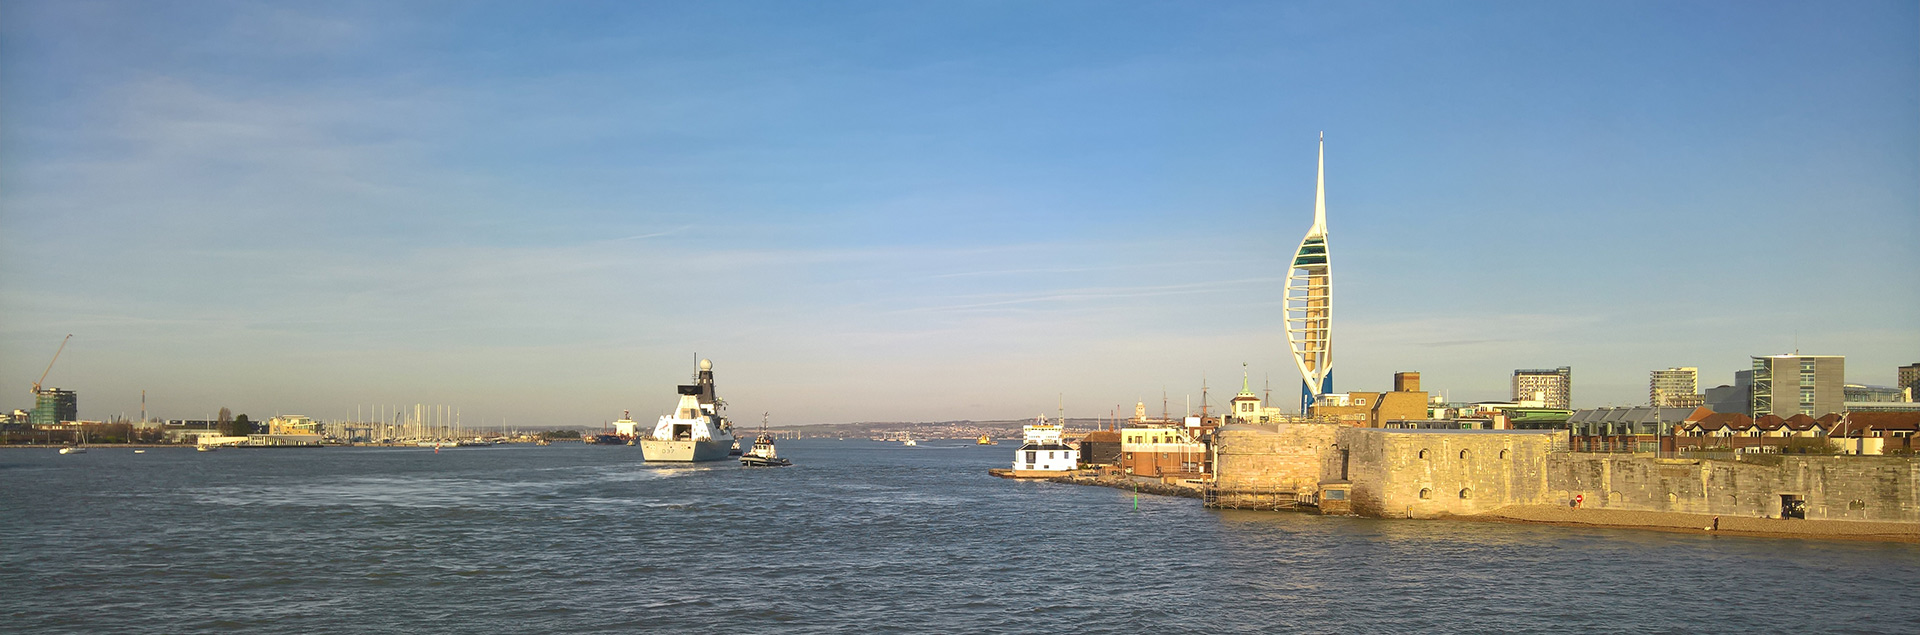 How easy is catching the ferry to the Isle of Wight?